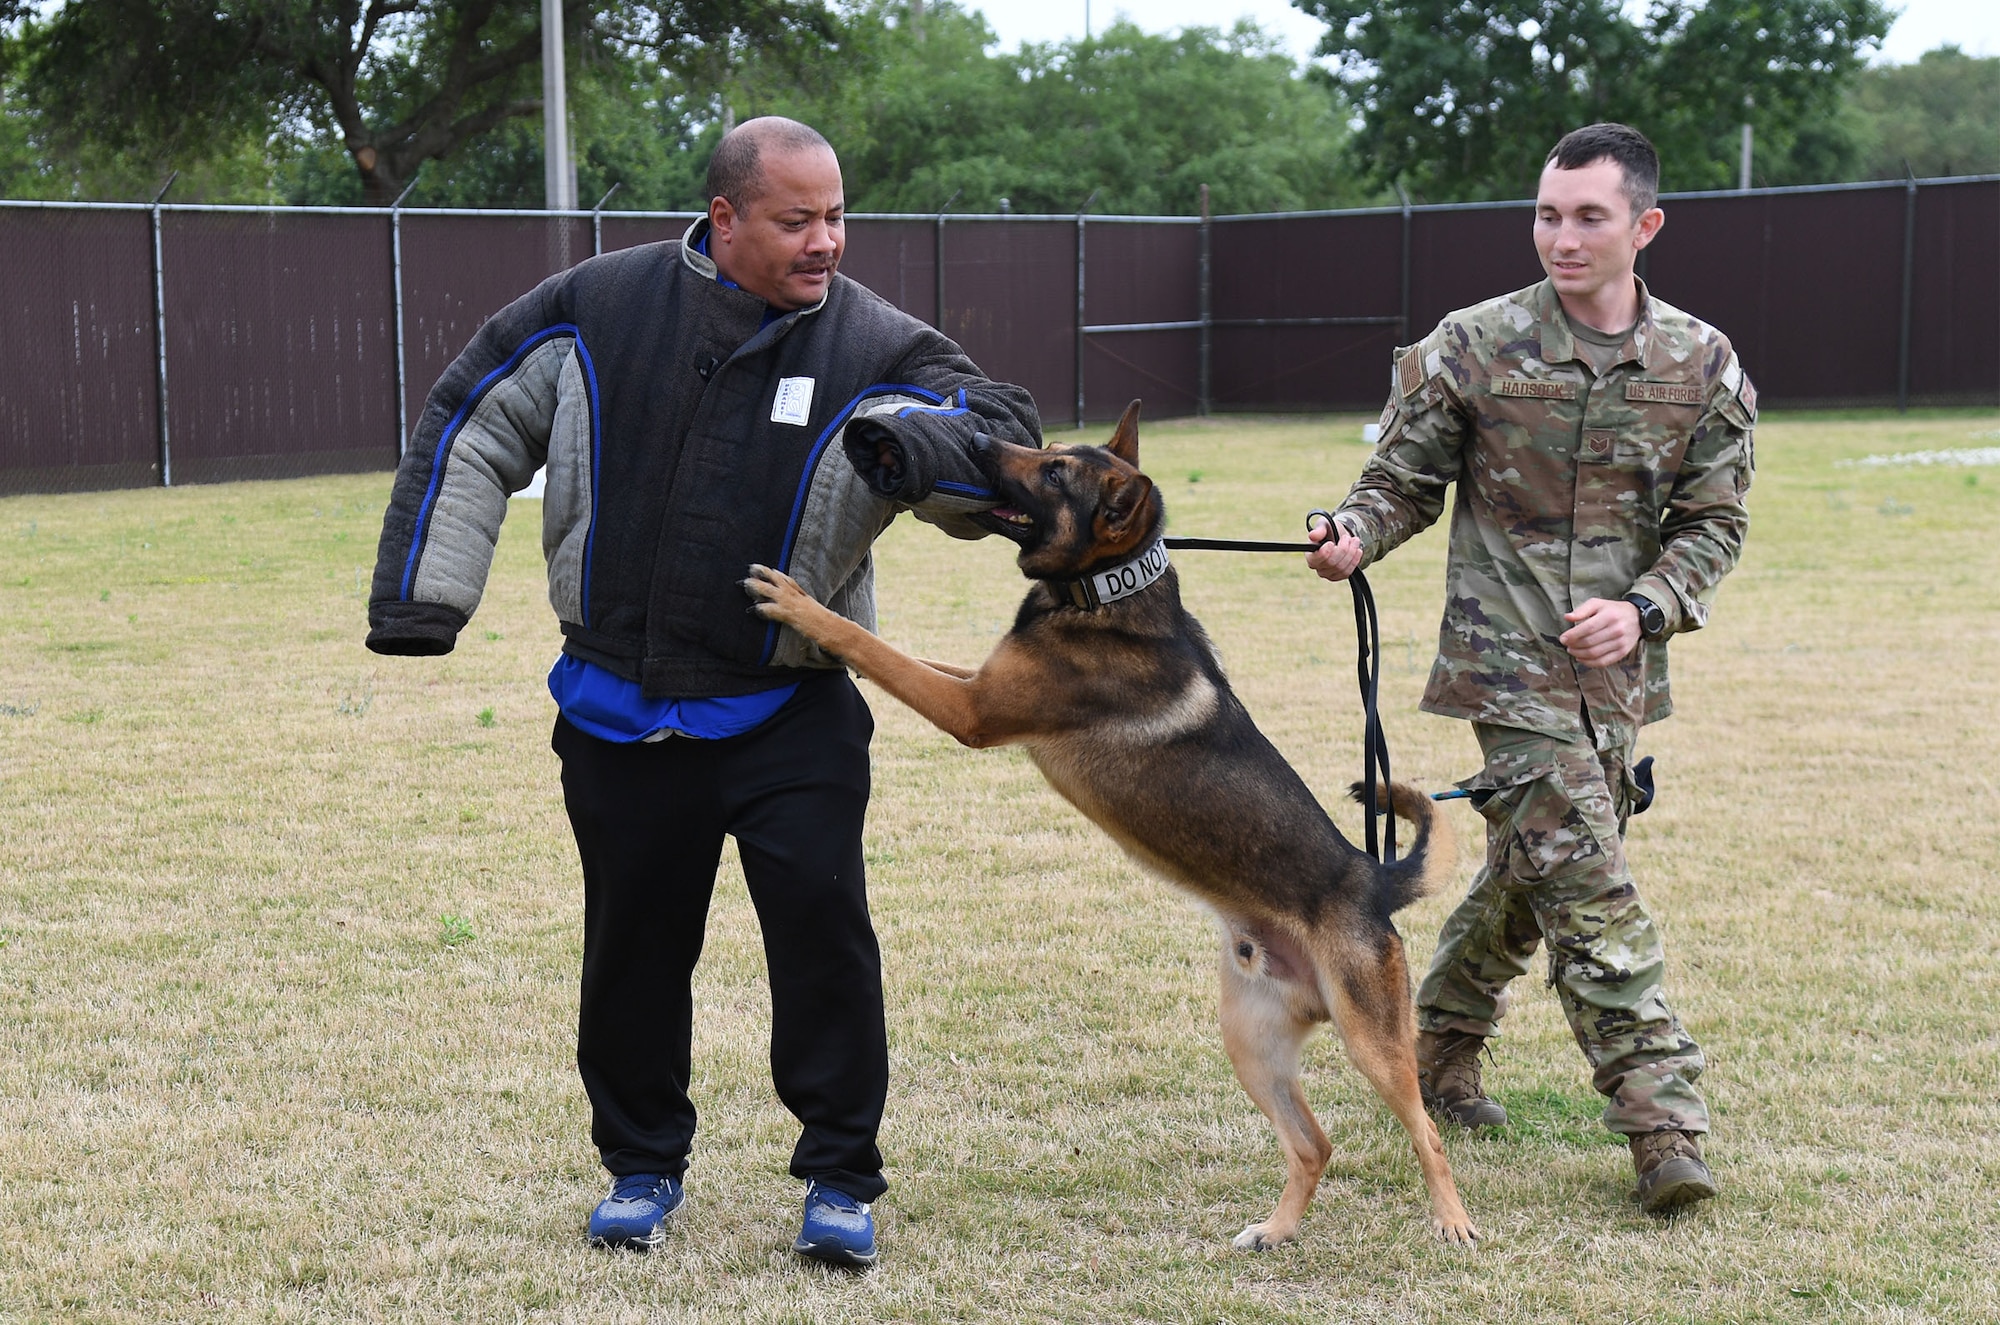 U.S. Air Force Staff Sgt. Dustin Hadsock, 81st Security Forces Squadron military working dog handler, Rico, 81st SFS military working dog, and retired U.S. Army Sgt. 1st Class Michael Turner, Jefferson Davis County High School Junior ROTC instructor, provides a demonstration to Jefferson Davis County High School Junior ROTC cadets outside the kennel at Keesler Air Force Base, Mississippi, April 12, 2022. Throughout their visit to Keesler, more than 30 cadets also received a Hurricane Hunters briefing and visited air traffic control training courses. (U.S. Air Force photo by Kemberly Groue)